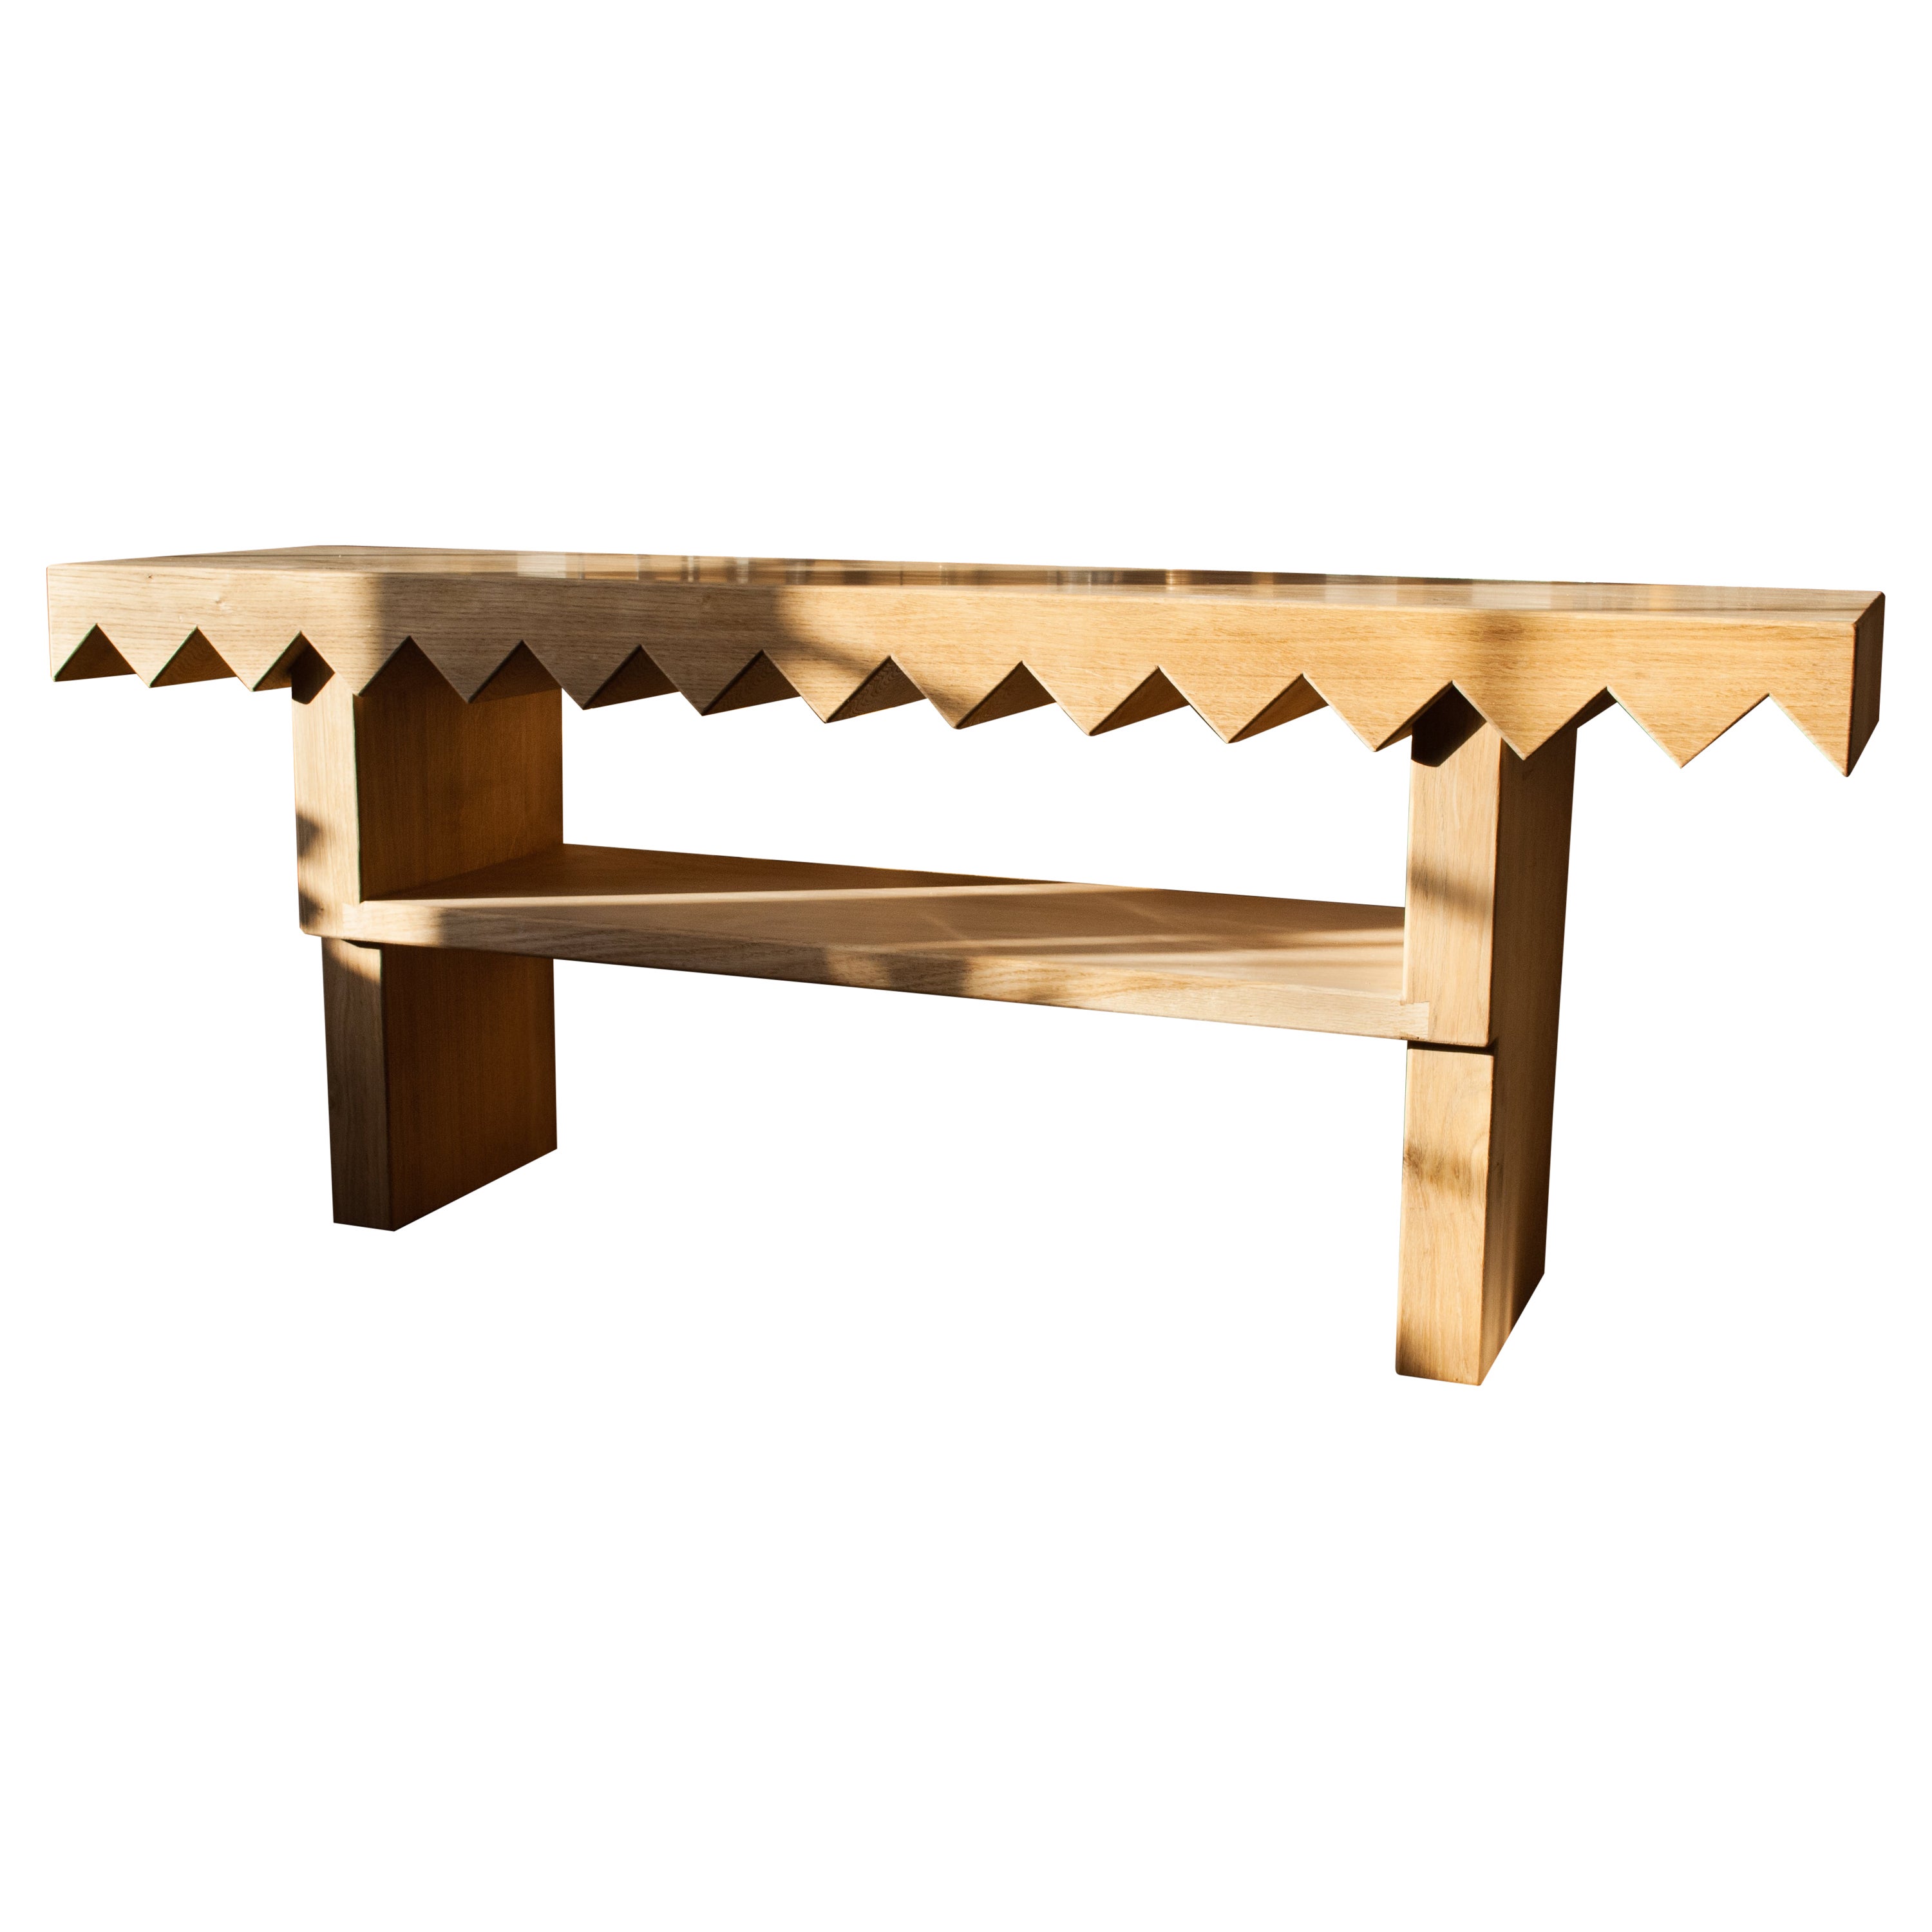 Sawtooth Bench in Solid English Oak Designed and Handmade by Loose Fit in the UK